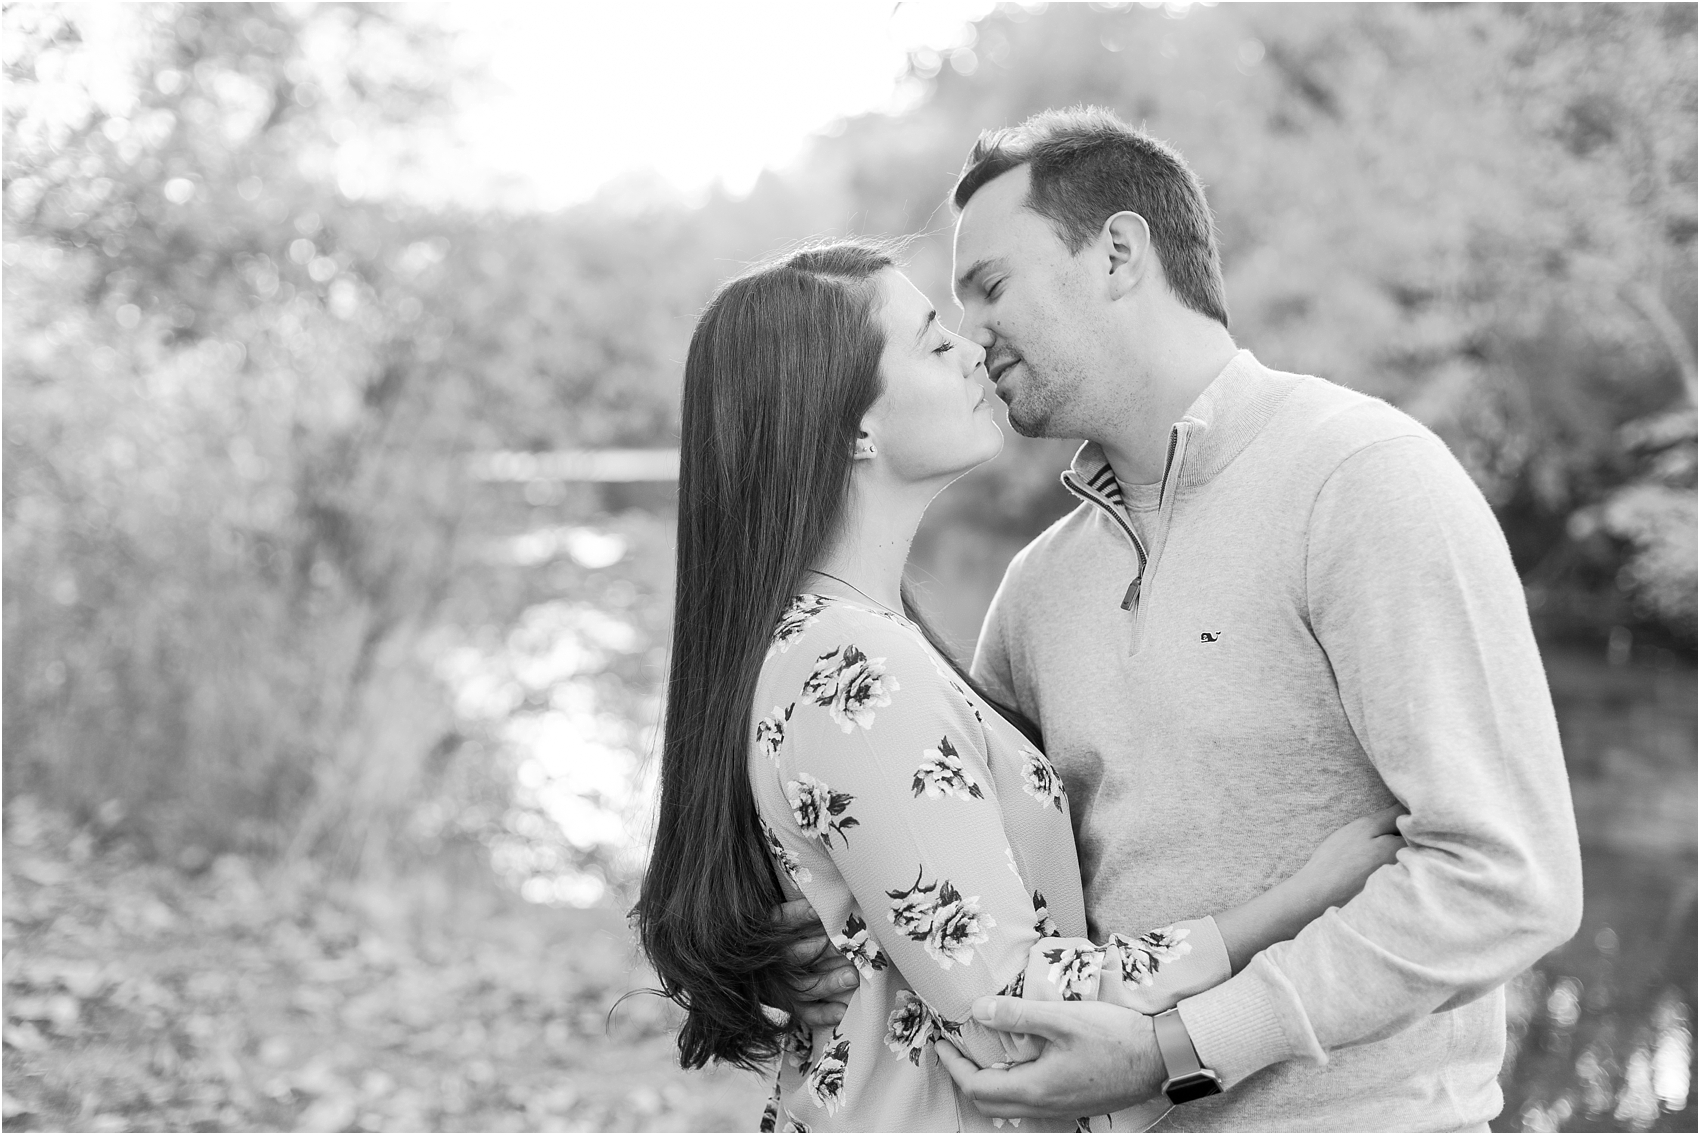 relaxed-autumn-engagement-photos-at-hudson-mills-metropark-in-dexter-mi-by-courtney-carolyn-photography_0042.jpg